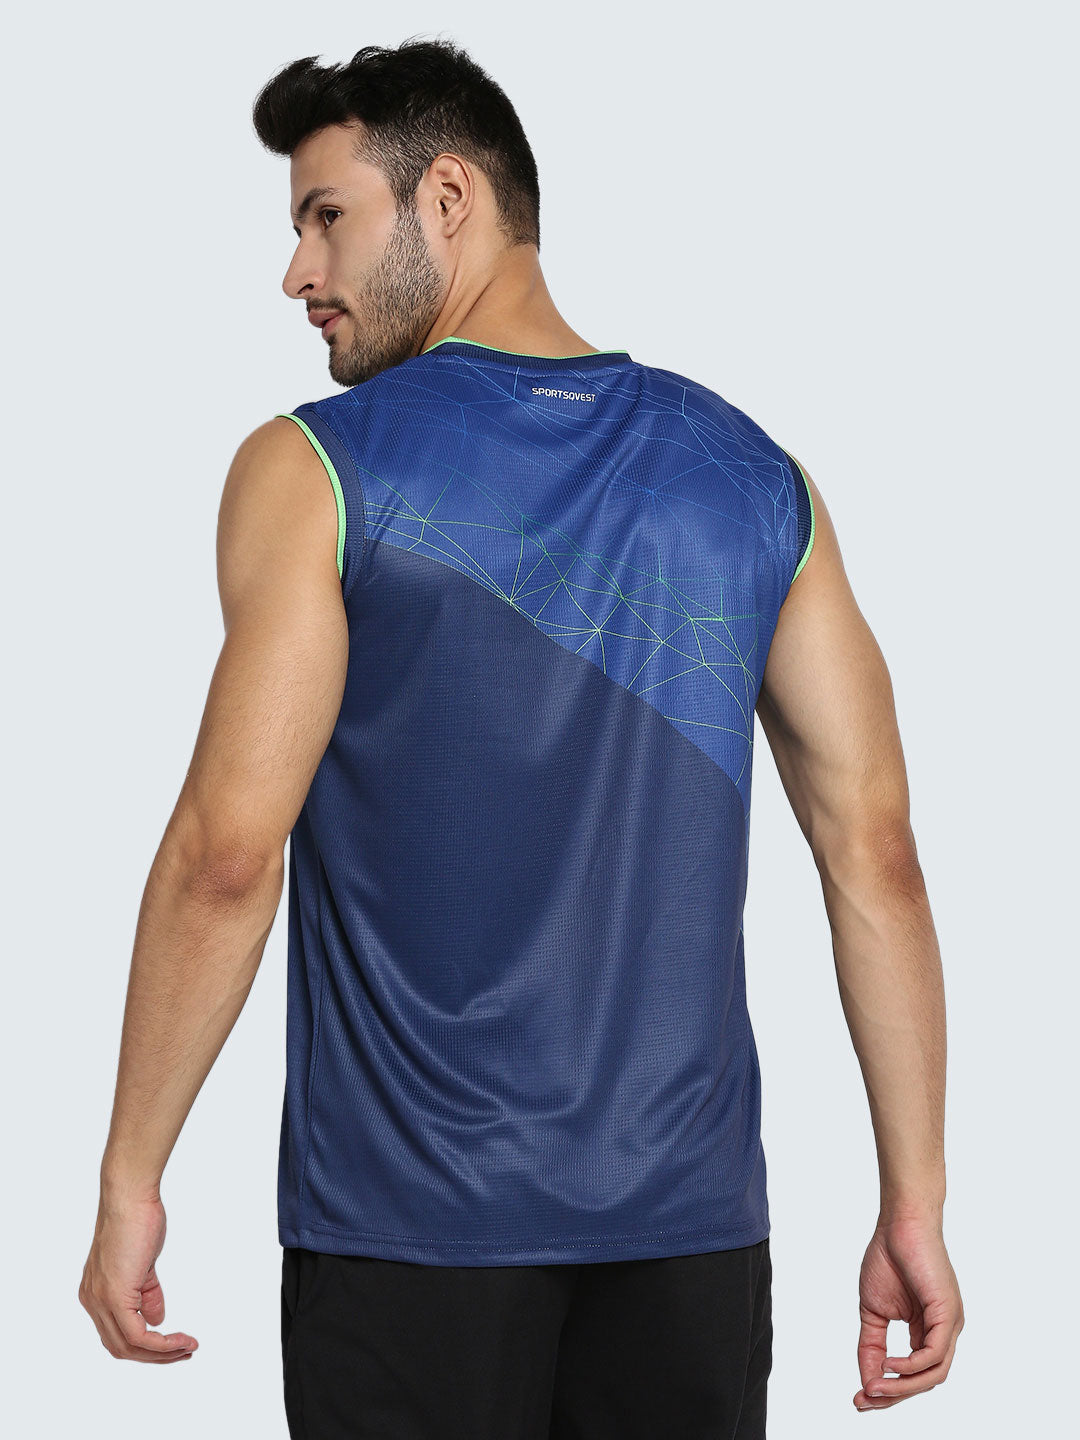 Men's Abstract Basketball Vest: Blue & Green - Front